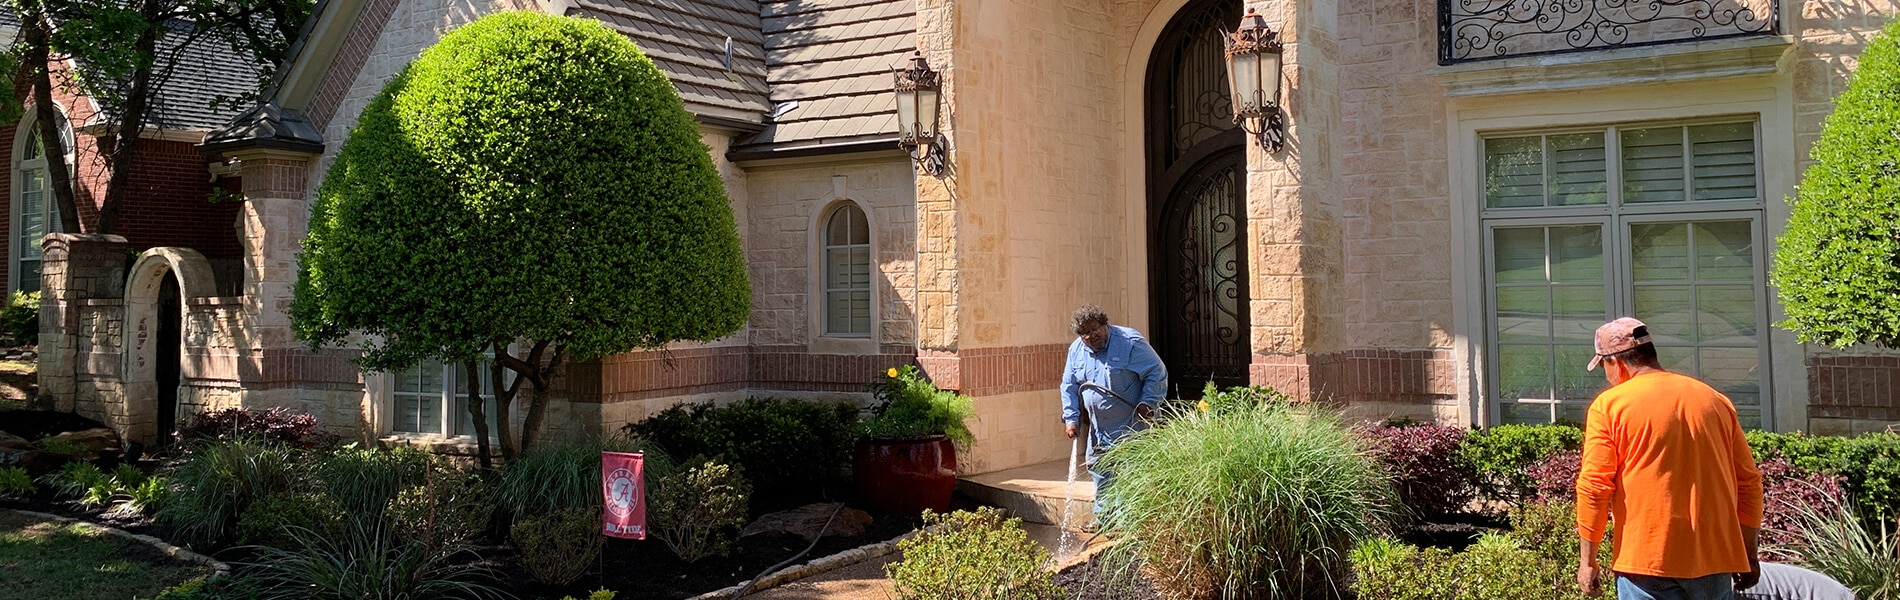 Green Earth Services Of Tx, Landscaping Companies In Texas